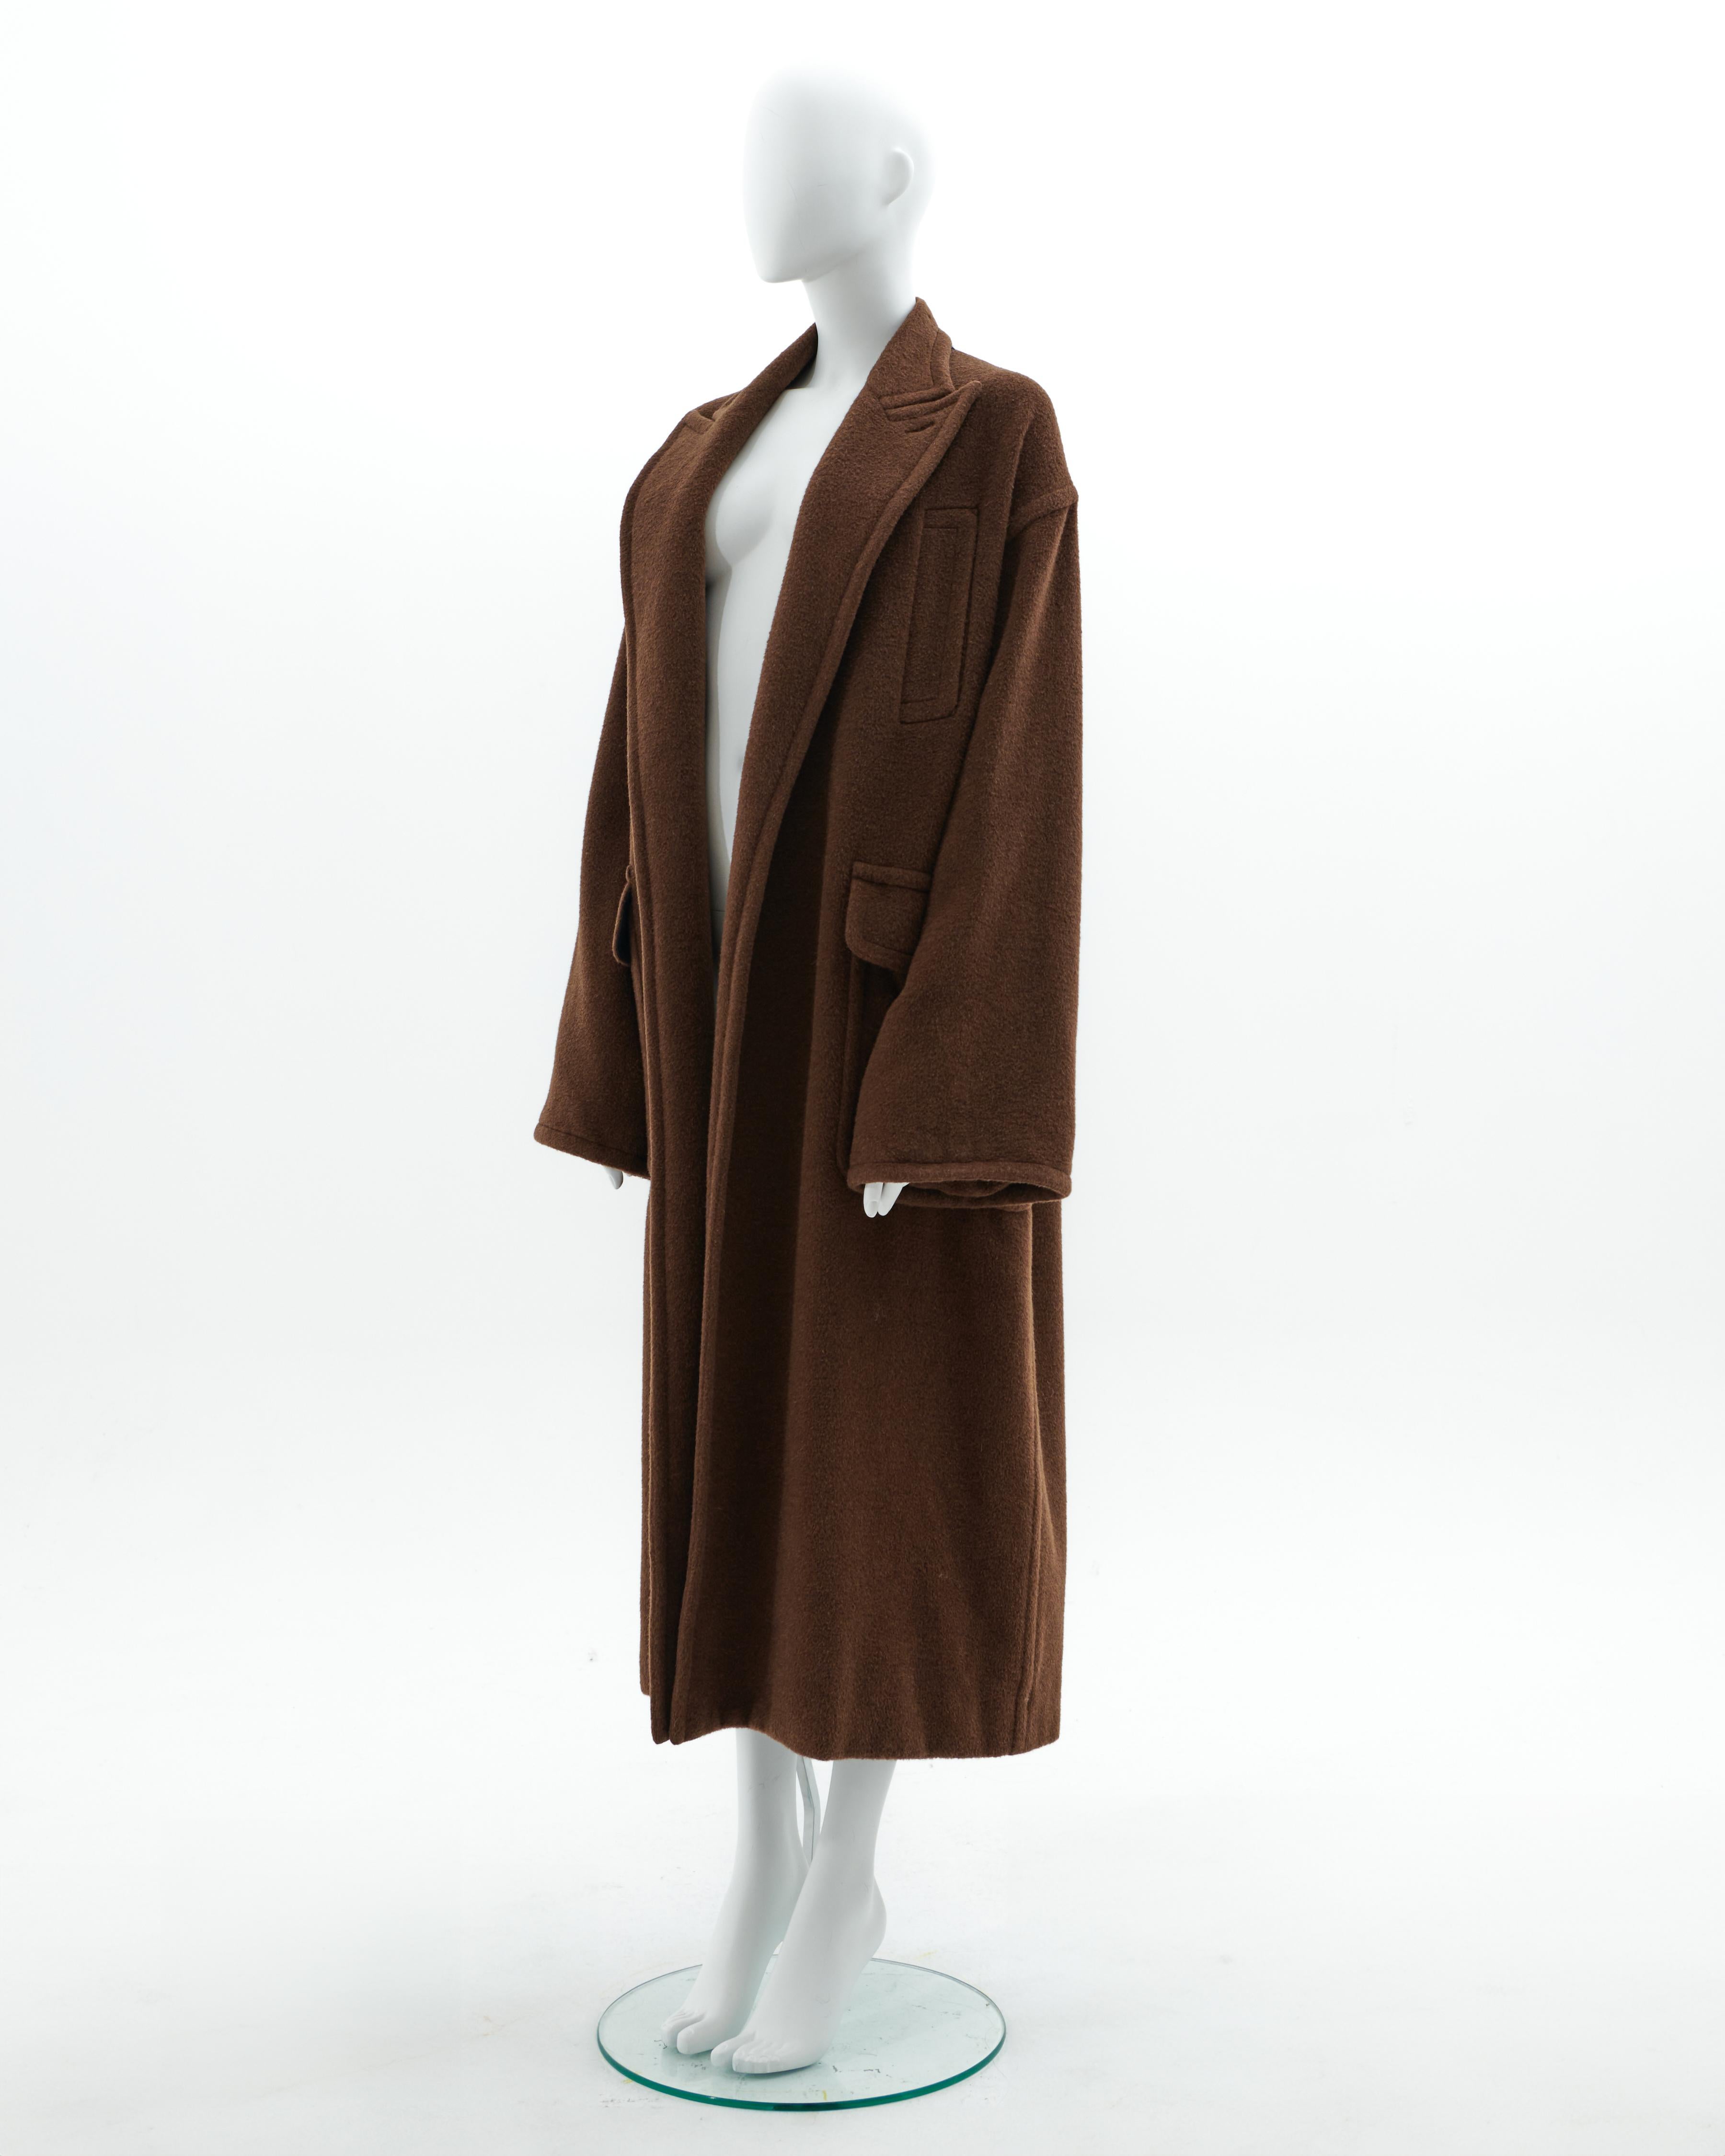 - 'Le Grand Voyage' collection 
- Sold by Skof.Archive 
- Fall-Winter 1994/95
- Fully printed silky lined with taurus zodiac sign all over
- Oversized fit
- Floor-length caramel wool coat
- Made in Italy

Condition: Excellent

Size: FR 40 - EN 44 -